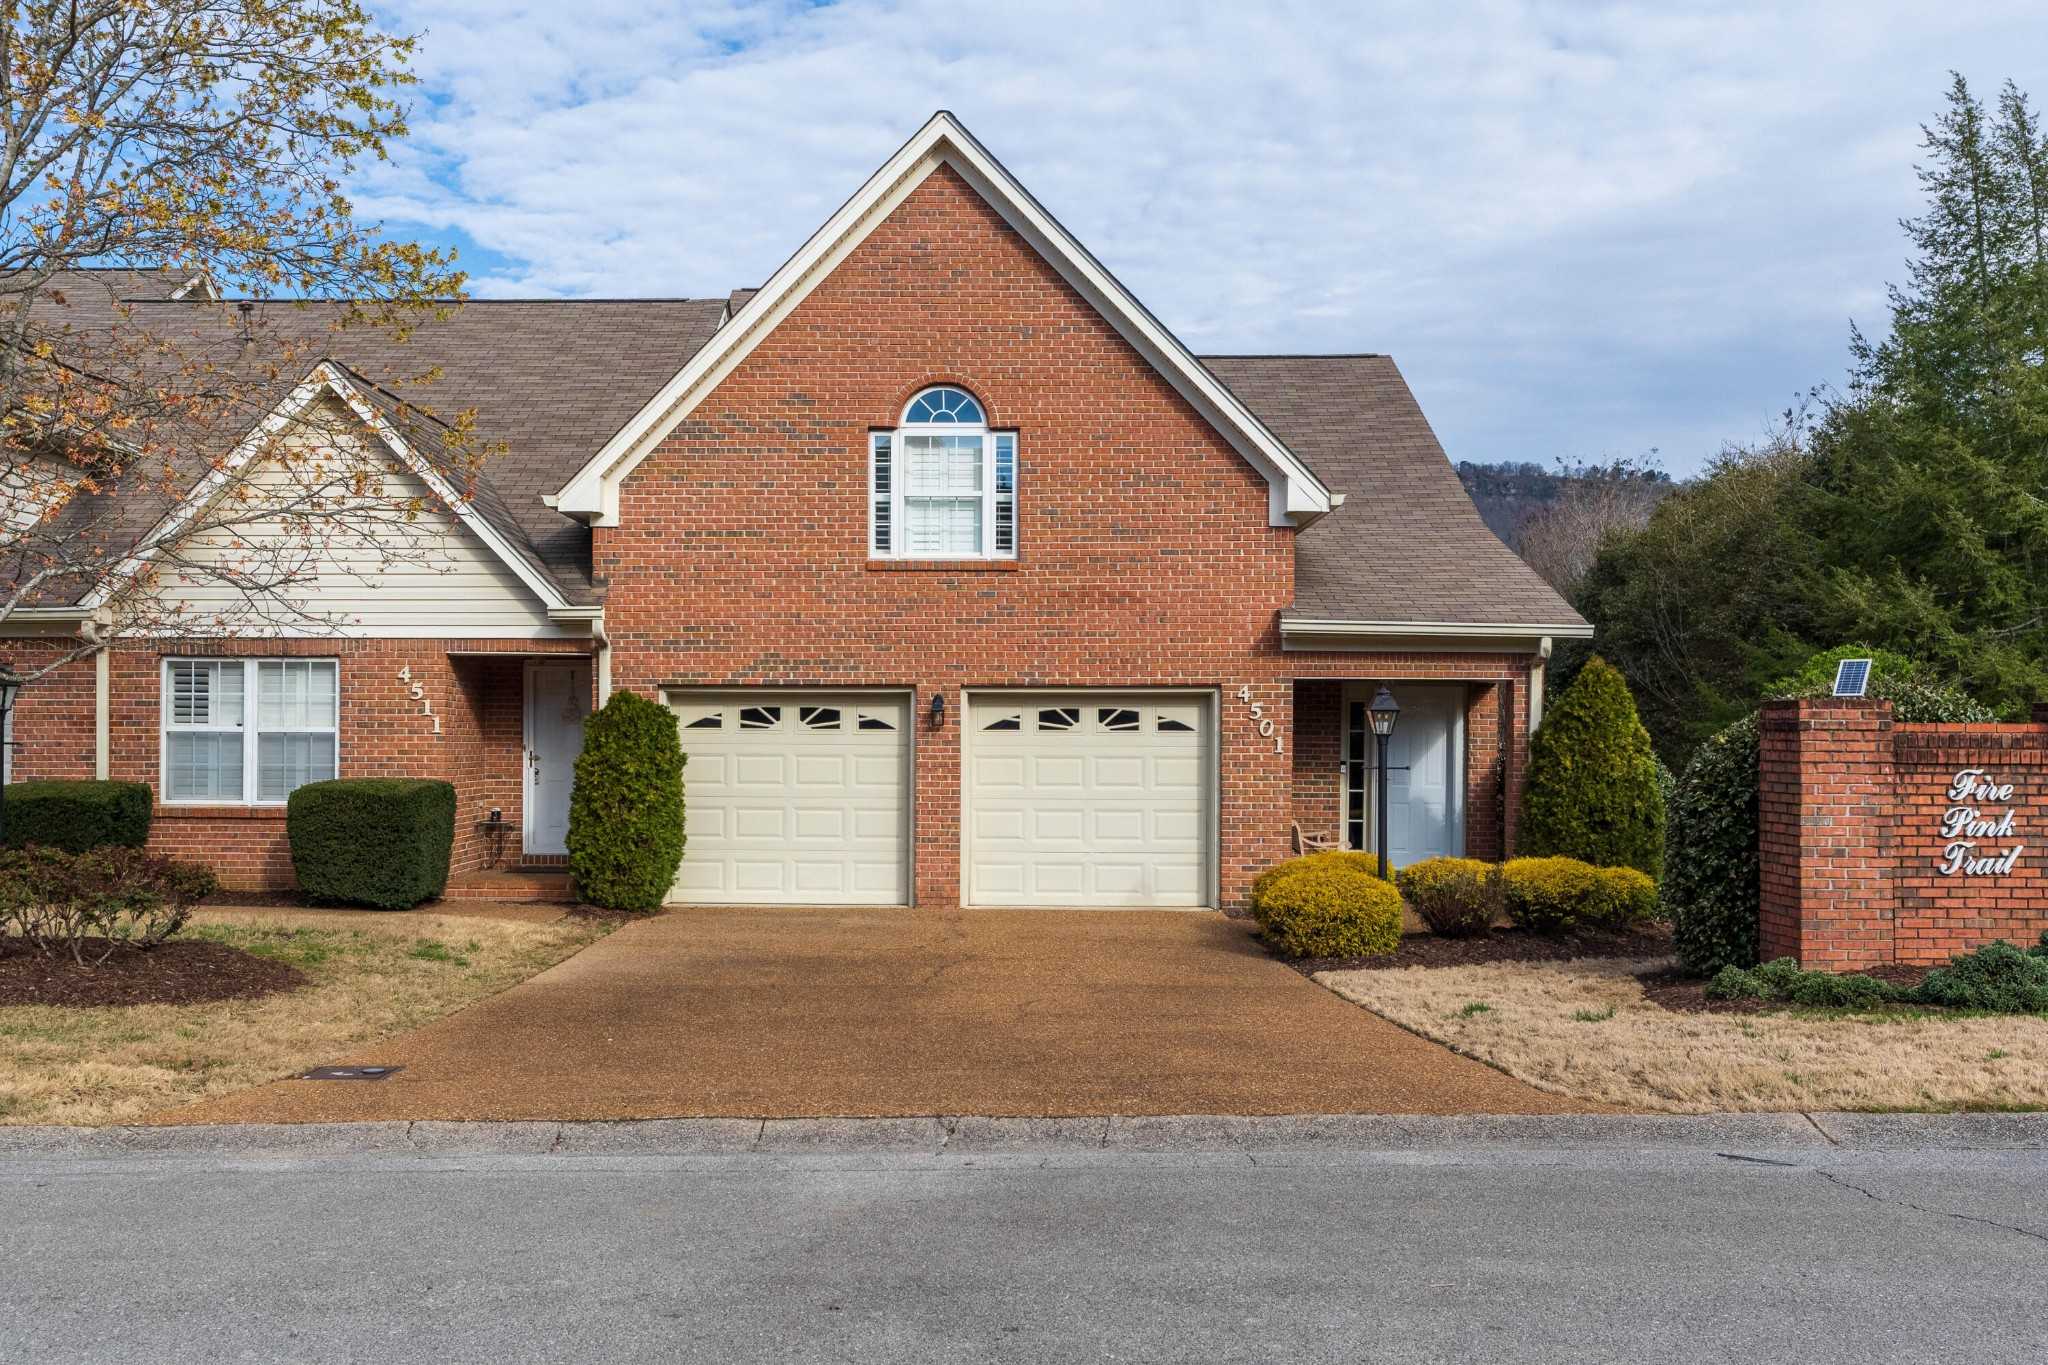 View Chattanooga, TN 37415 townhome